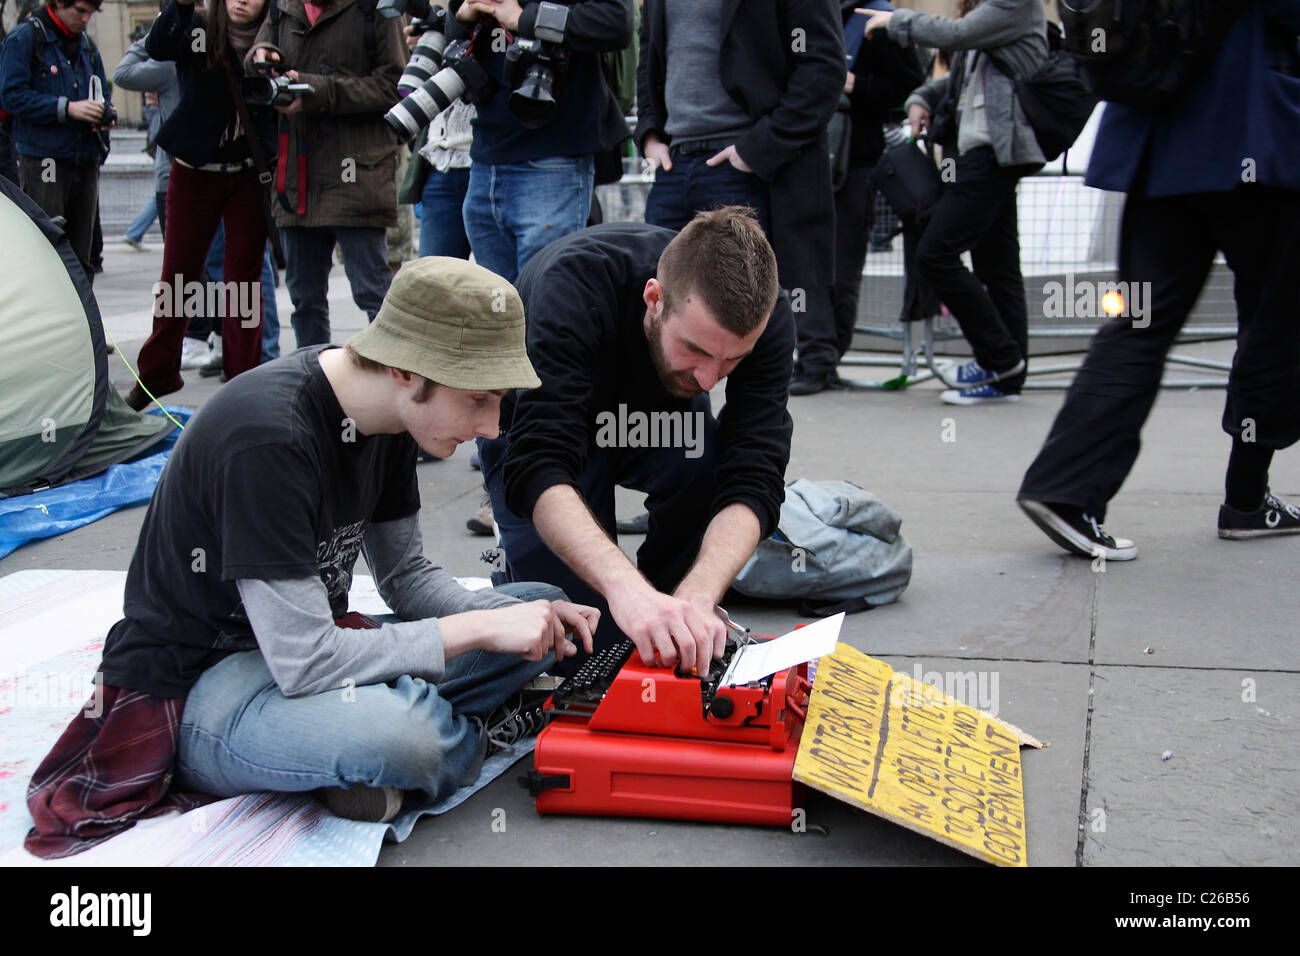 Protesters occupy Trafalgar Square in London for 24 hours Stock Photo